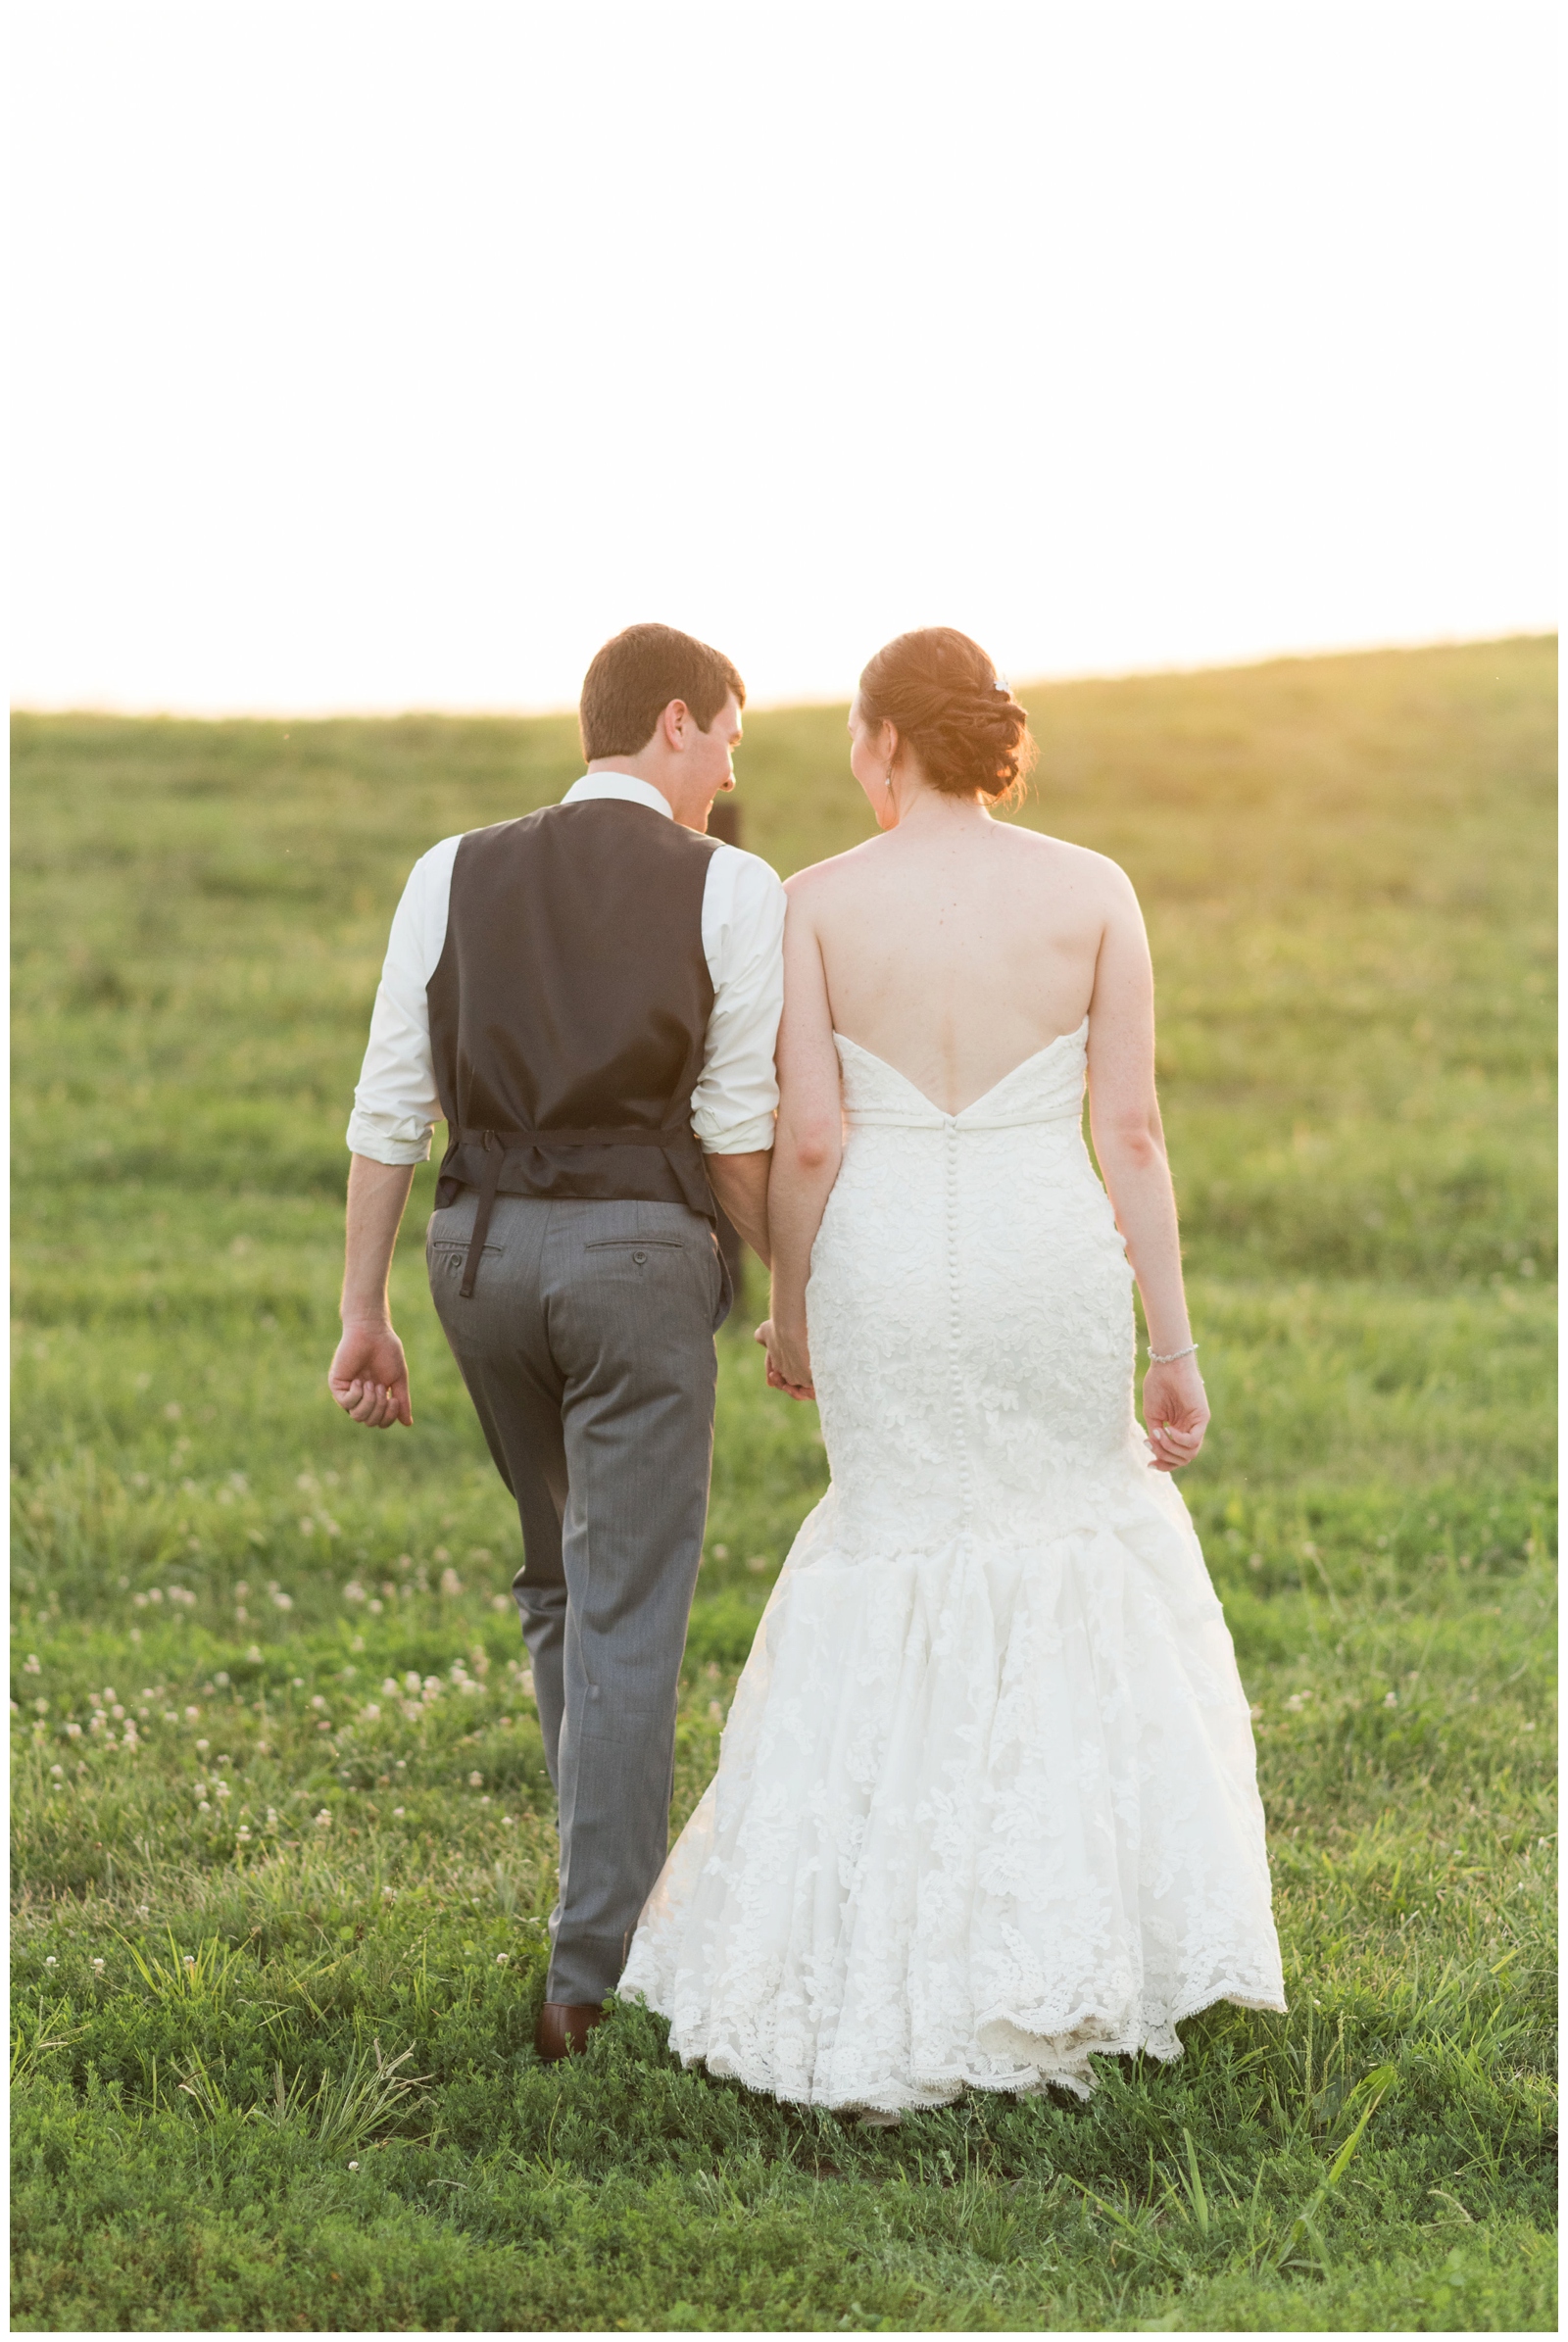 bride and groom walking into a field at sunset on their wedding day at harvest adventures in bremen ohio